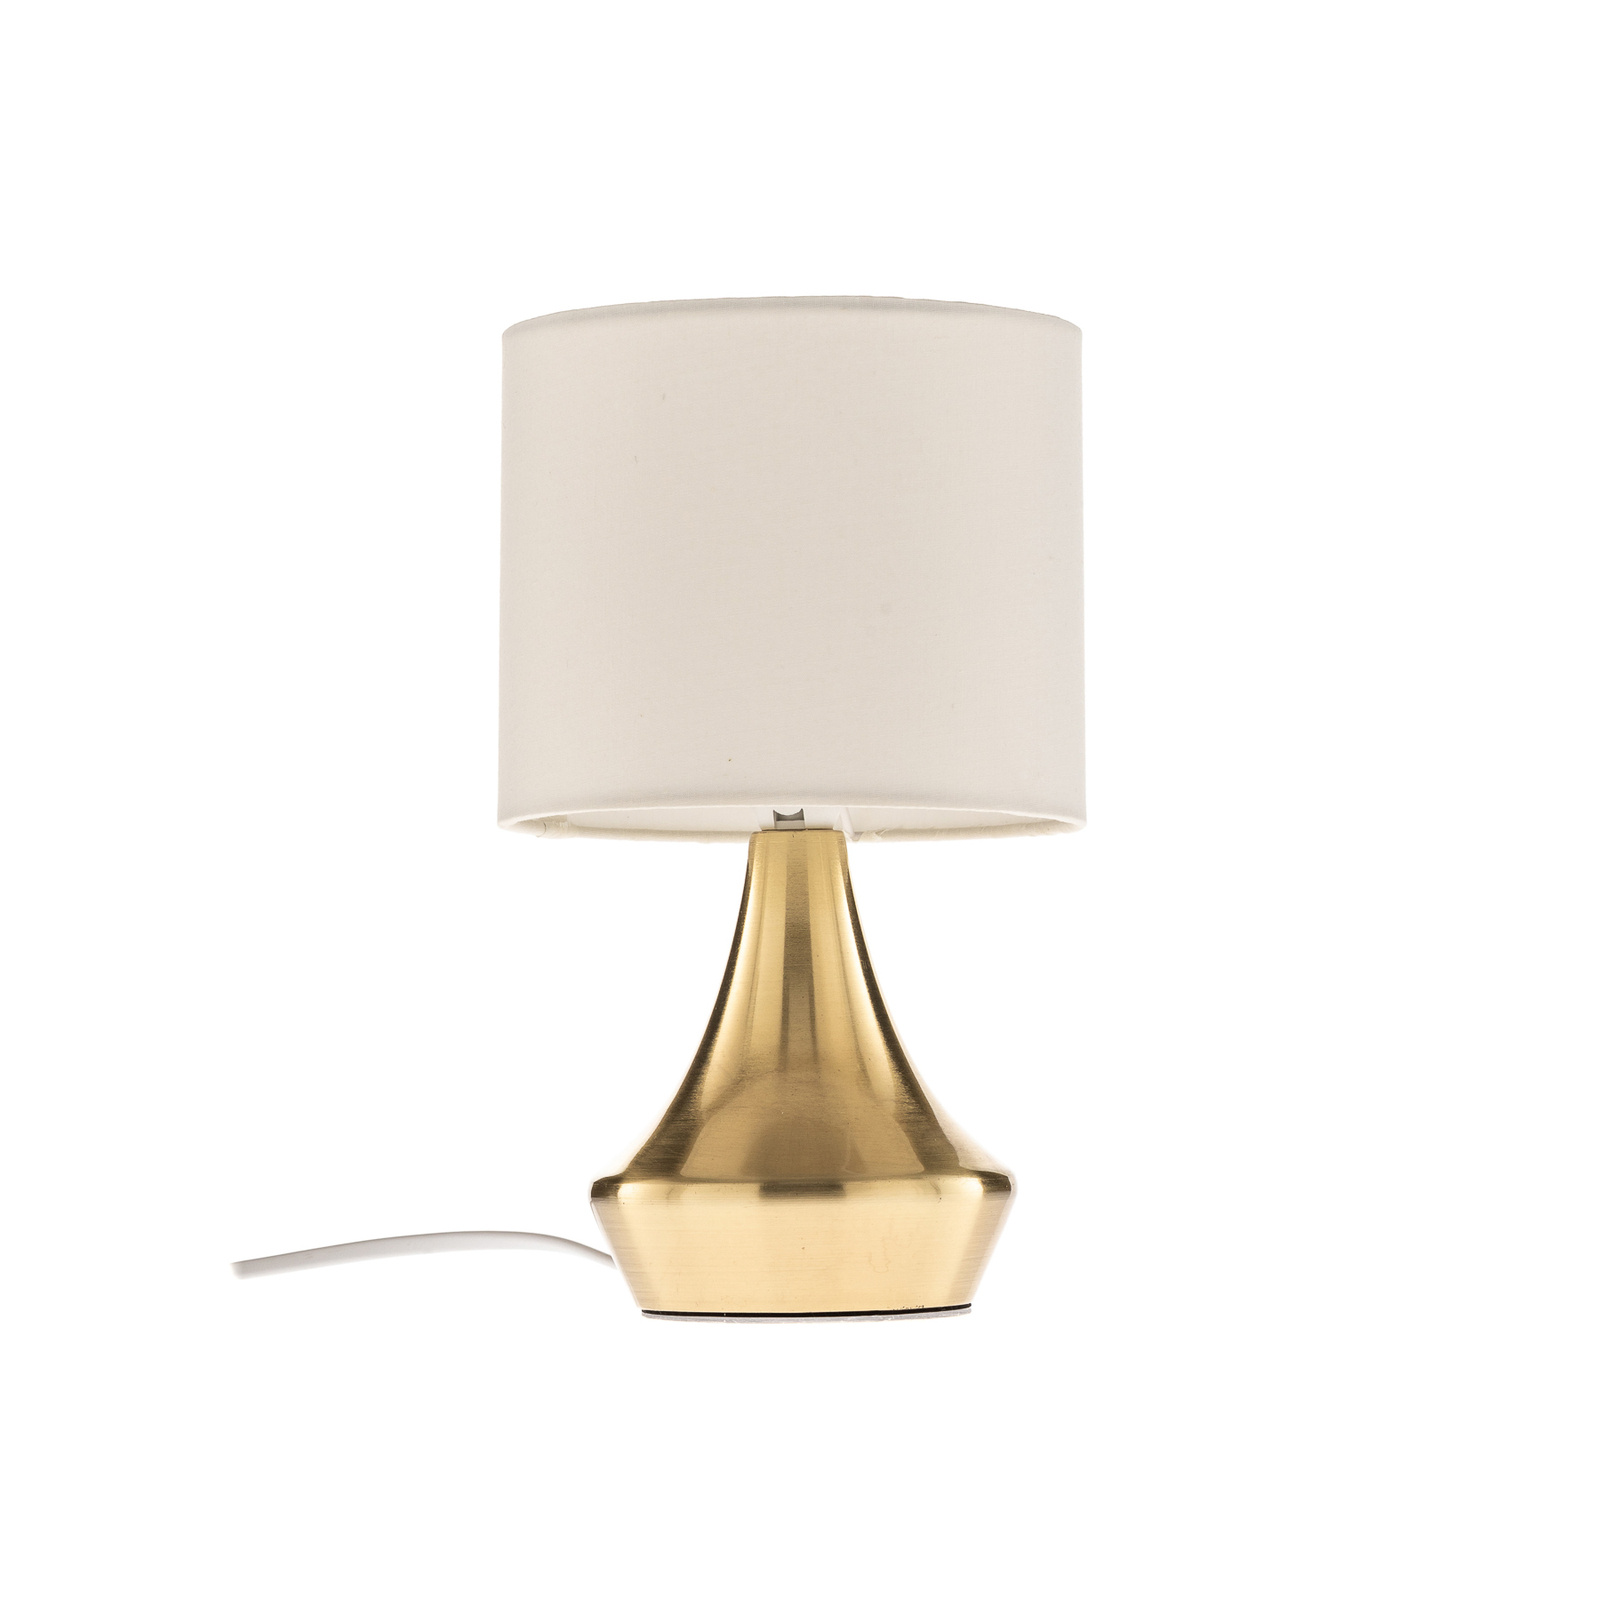 Ottone table lamp with a fabric lampshade, brass